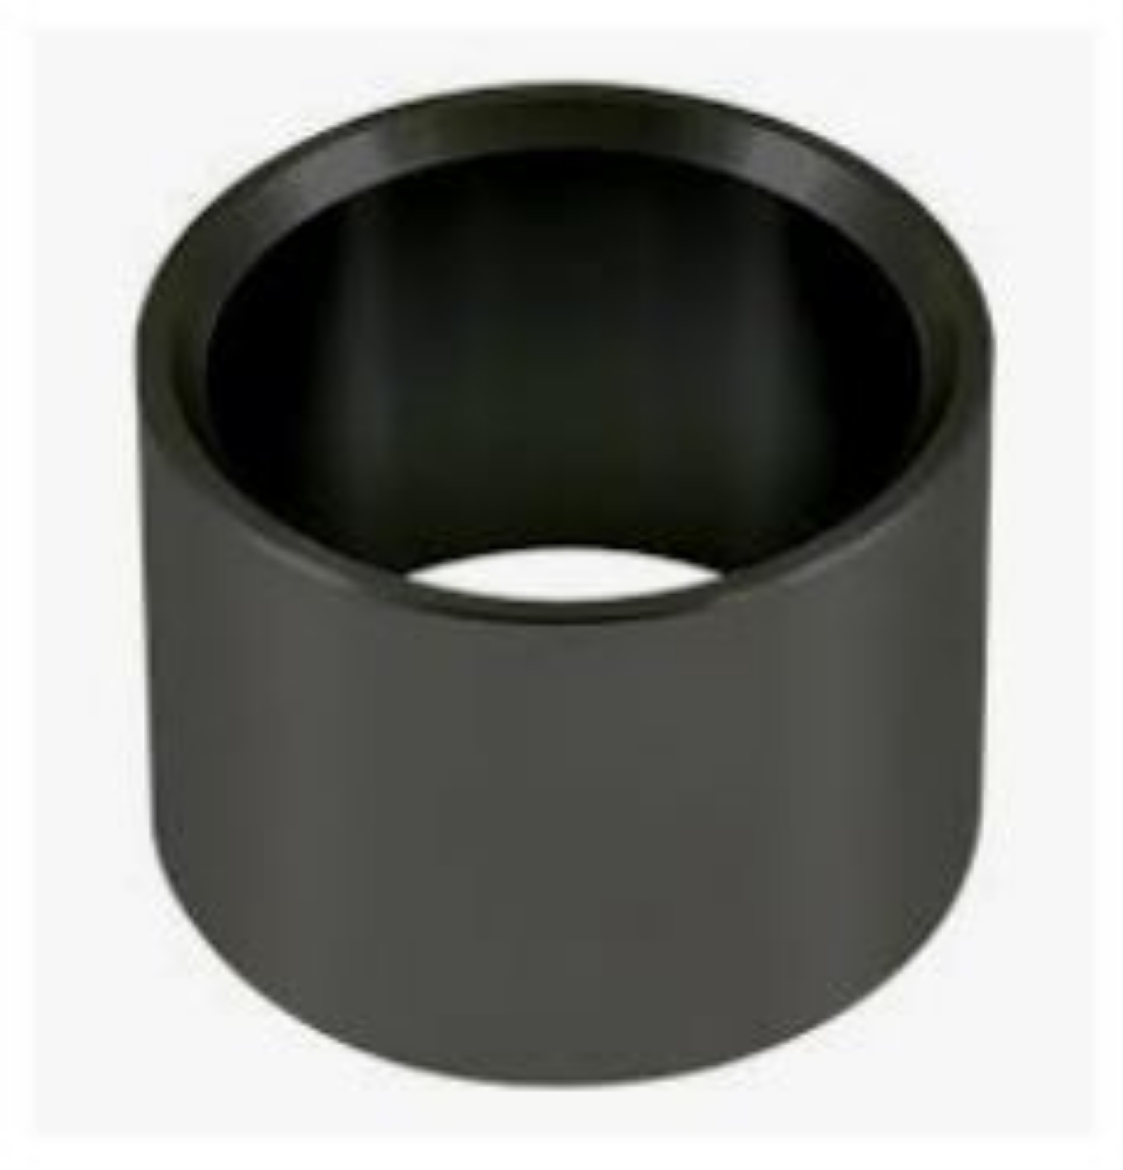 Picture of RINGFEDER TOW EYE BUSH 50MM OVERSIZE 61.2MM OD (1026992)